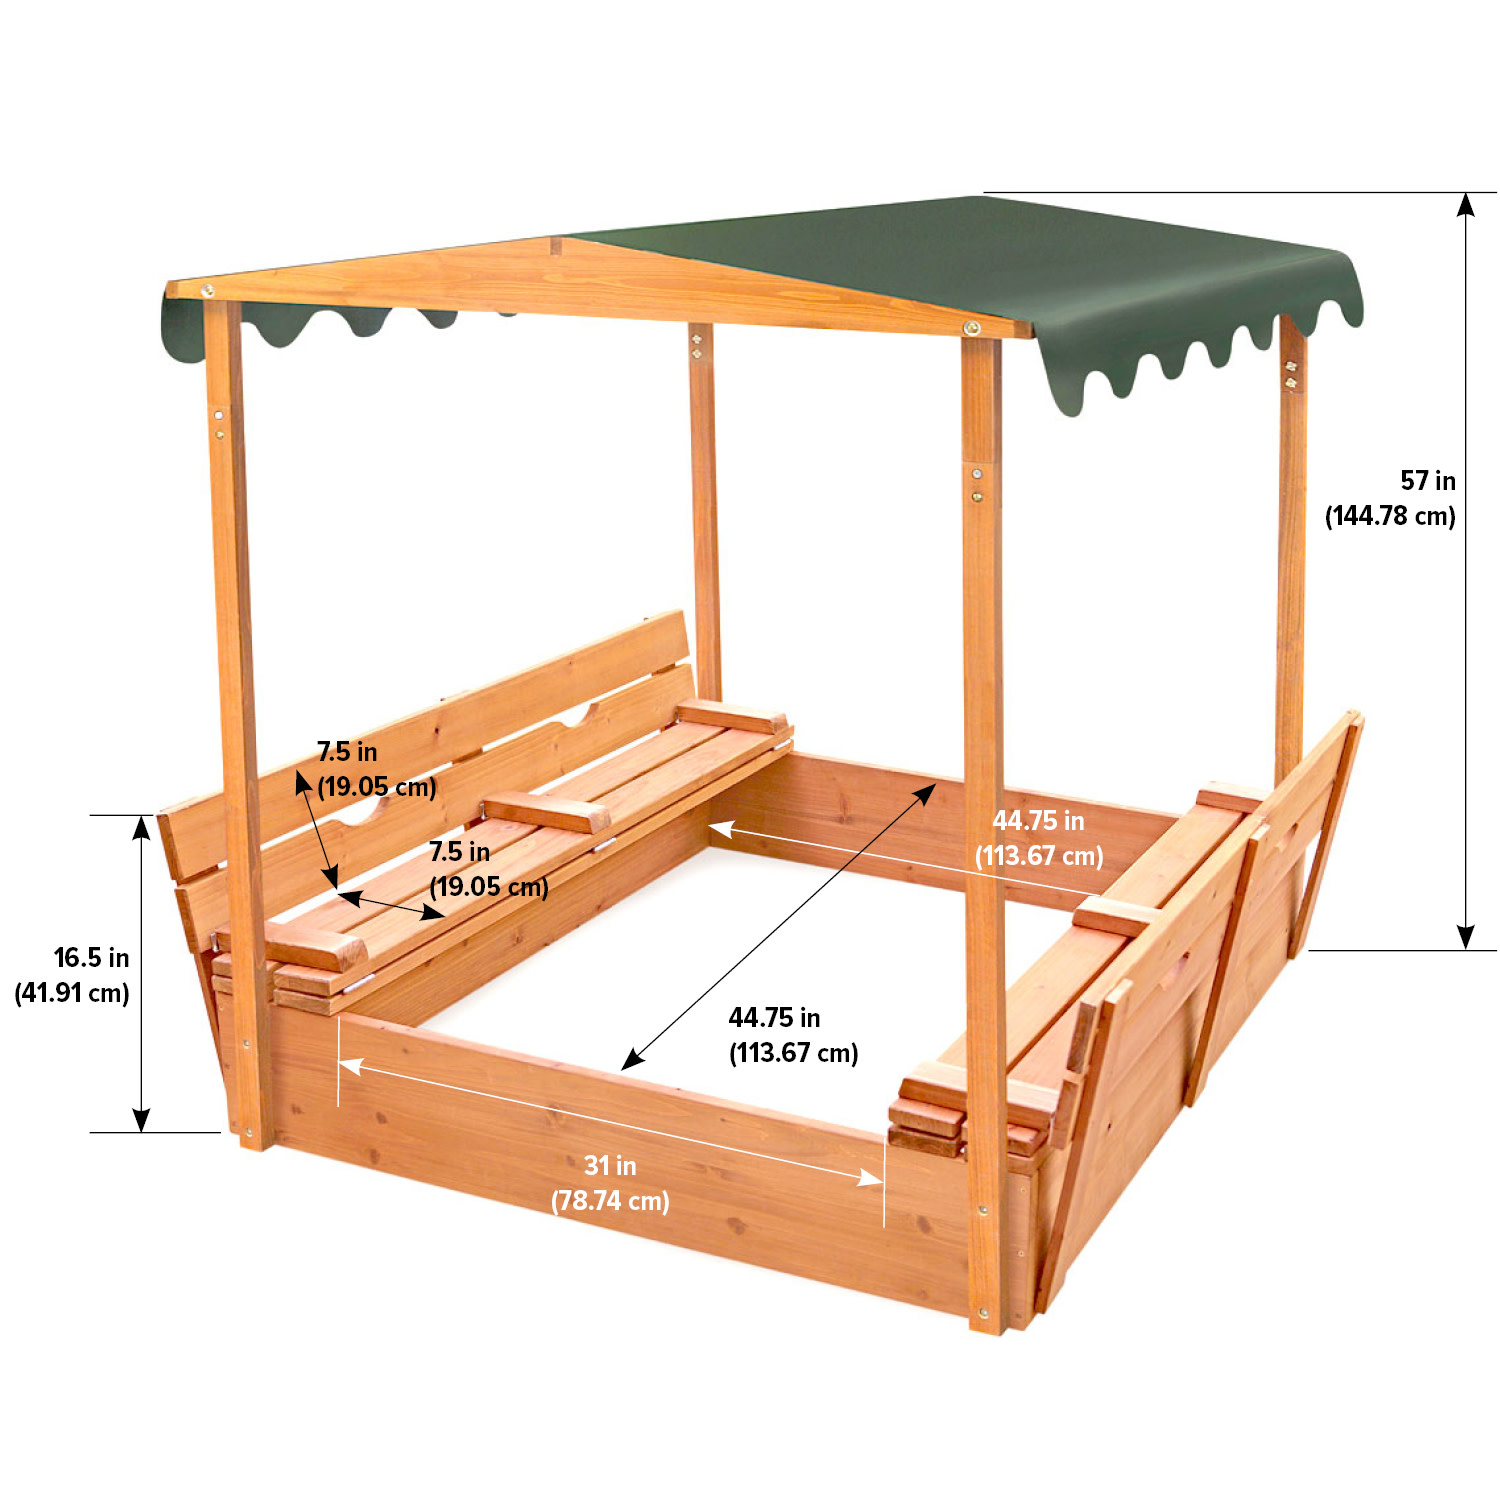 Badger Basket Covered Convertible Cedar Sandbox with Canopy and Two Bench Seats - image 5 of 9